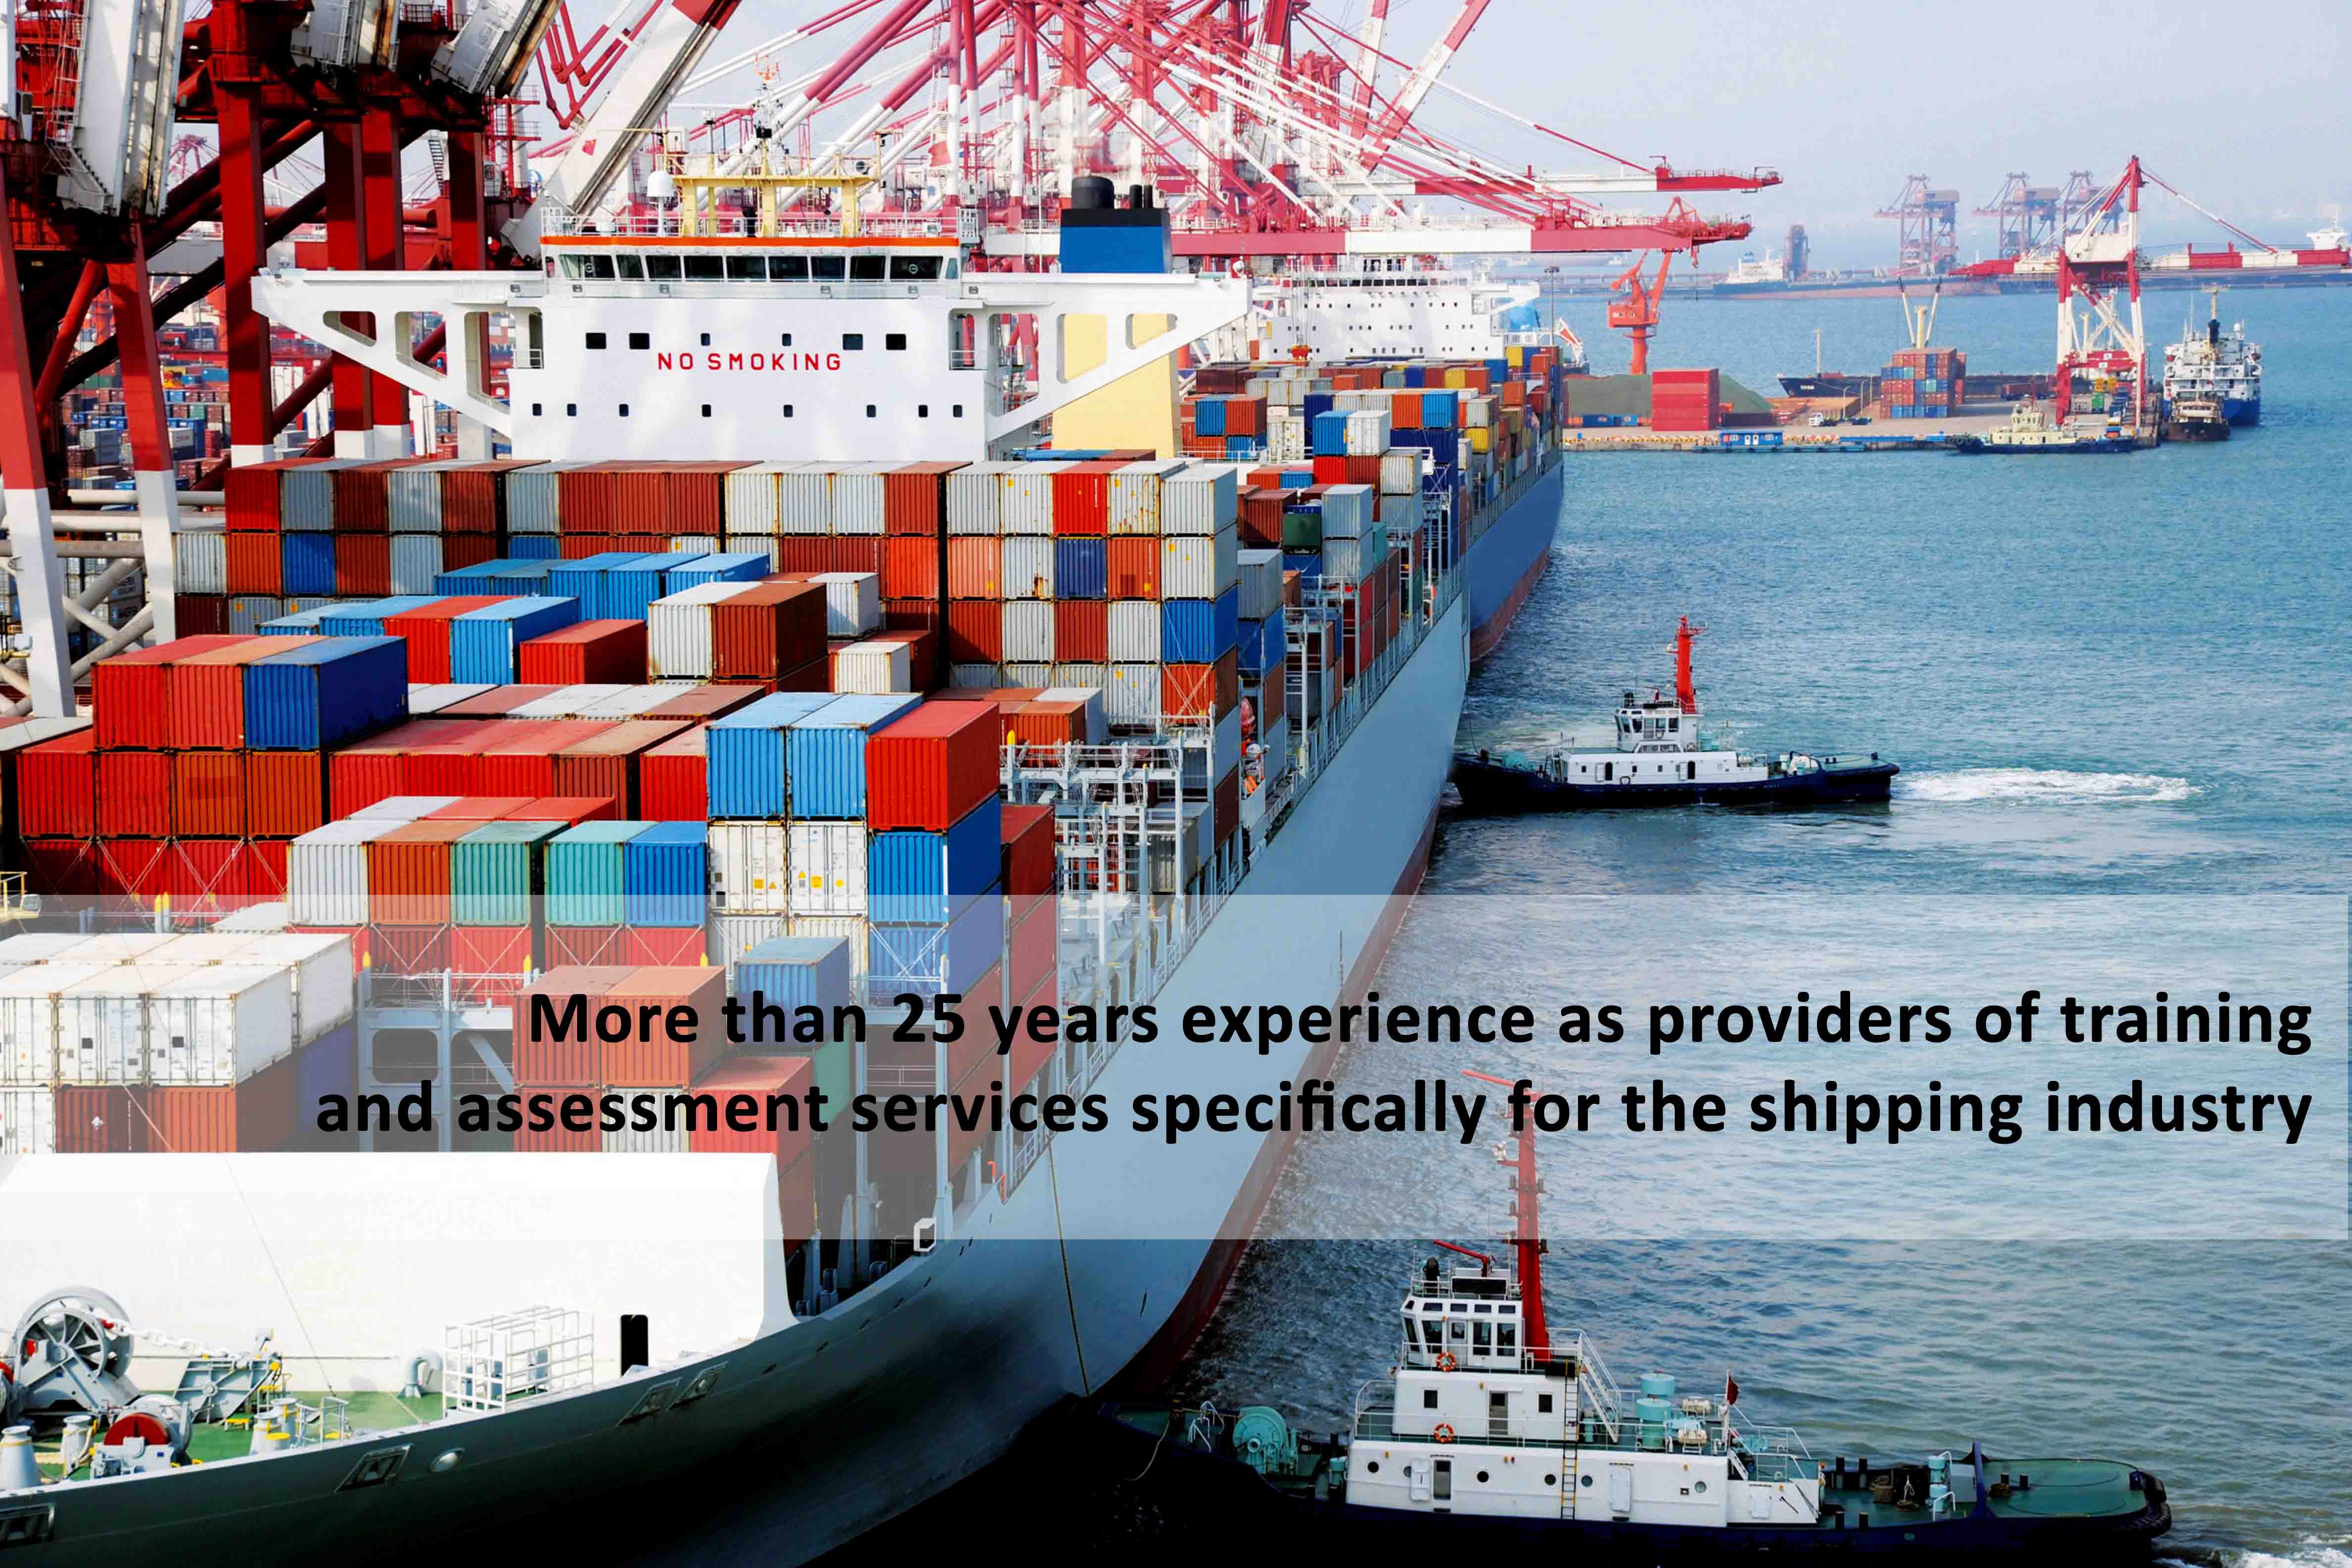 IDESS IT has more than 25 years experience as providers of training and assessment services specifically for the shipping industry